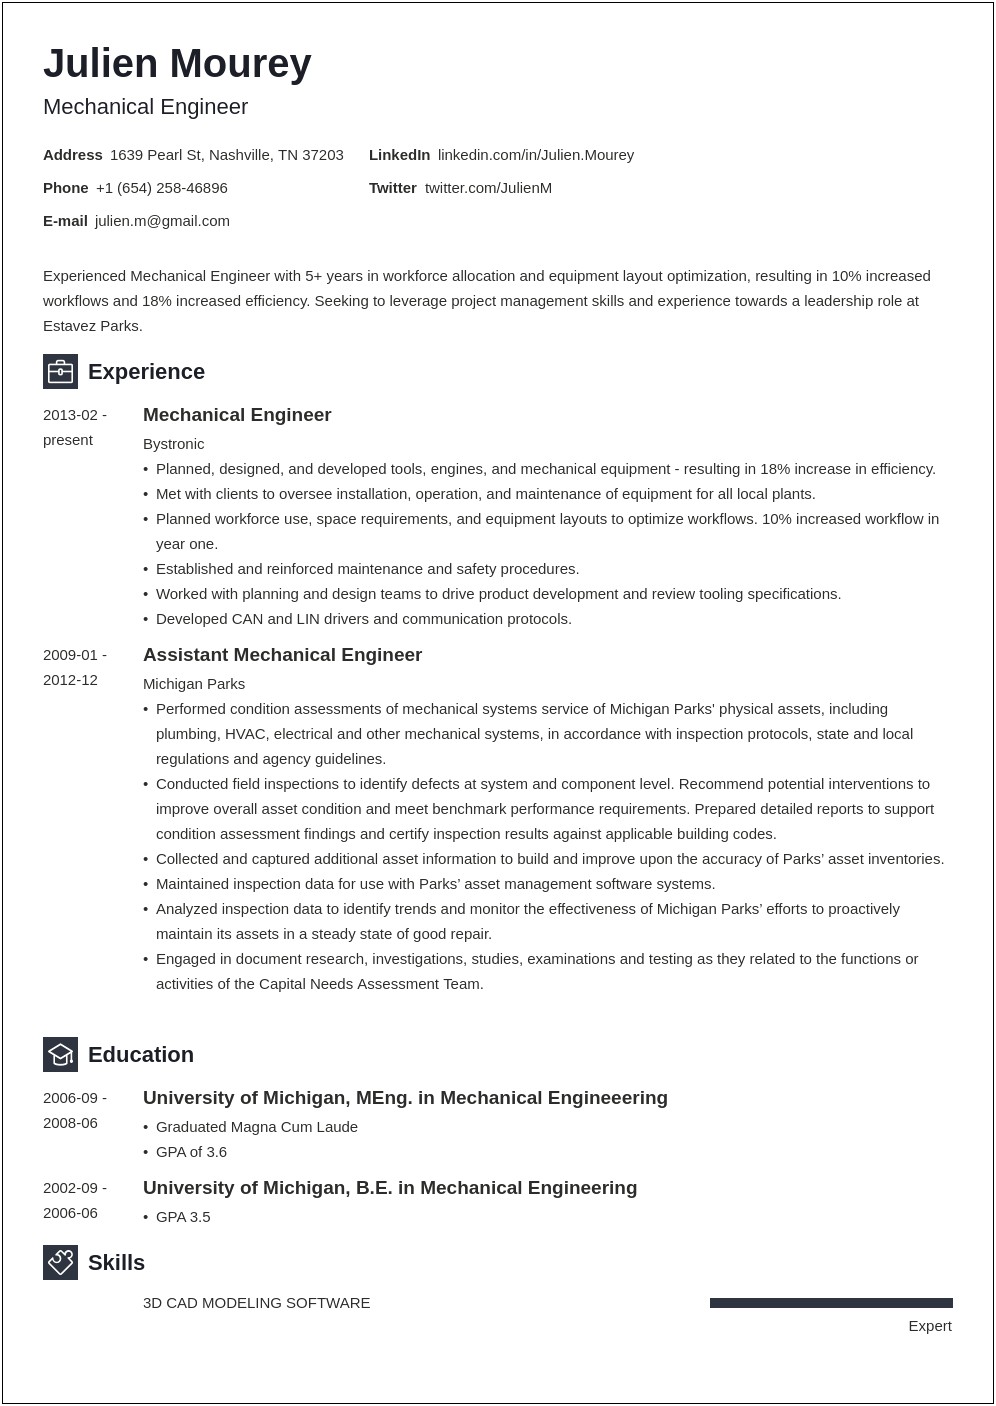 Resume Objective For Embedded Engineer